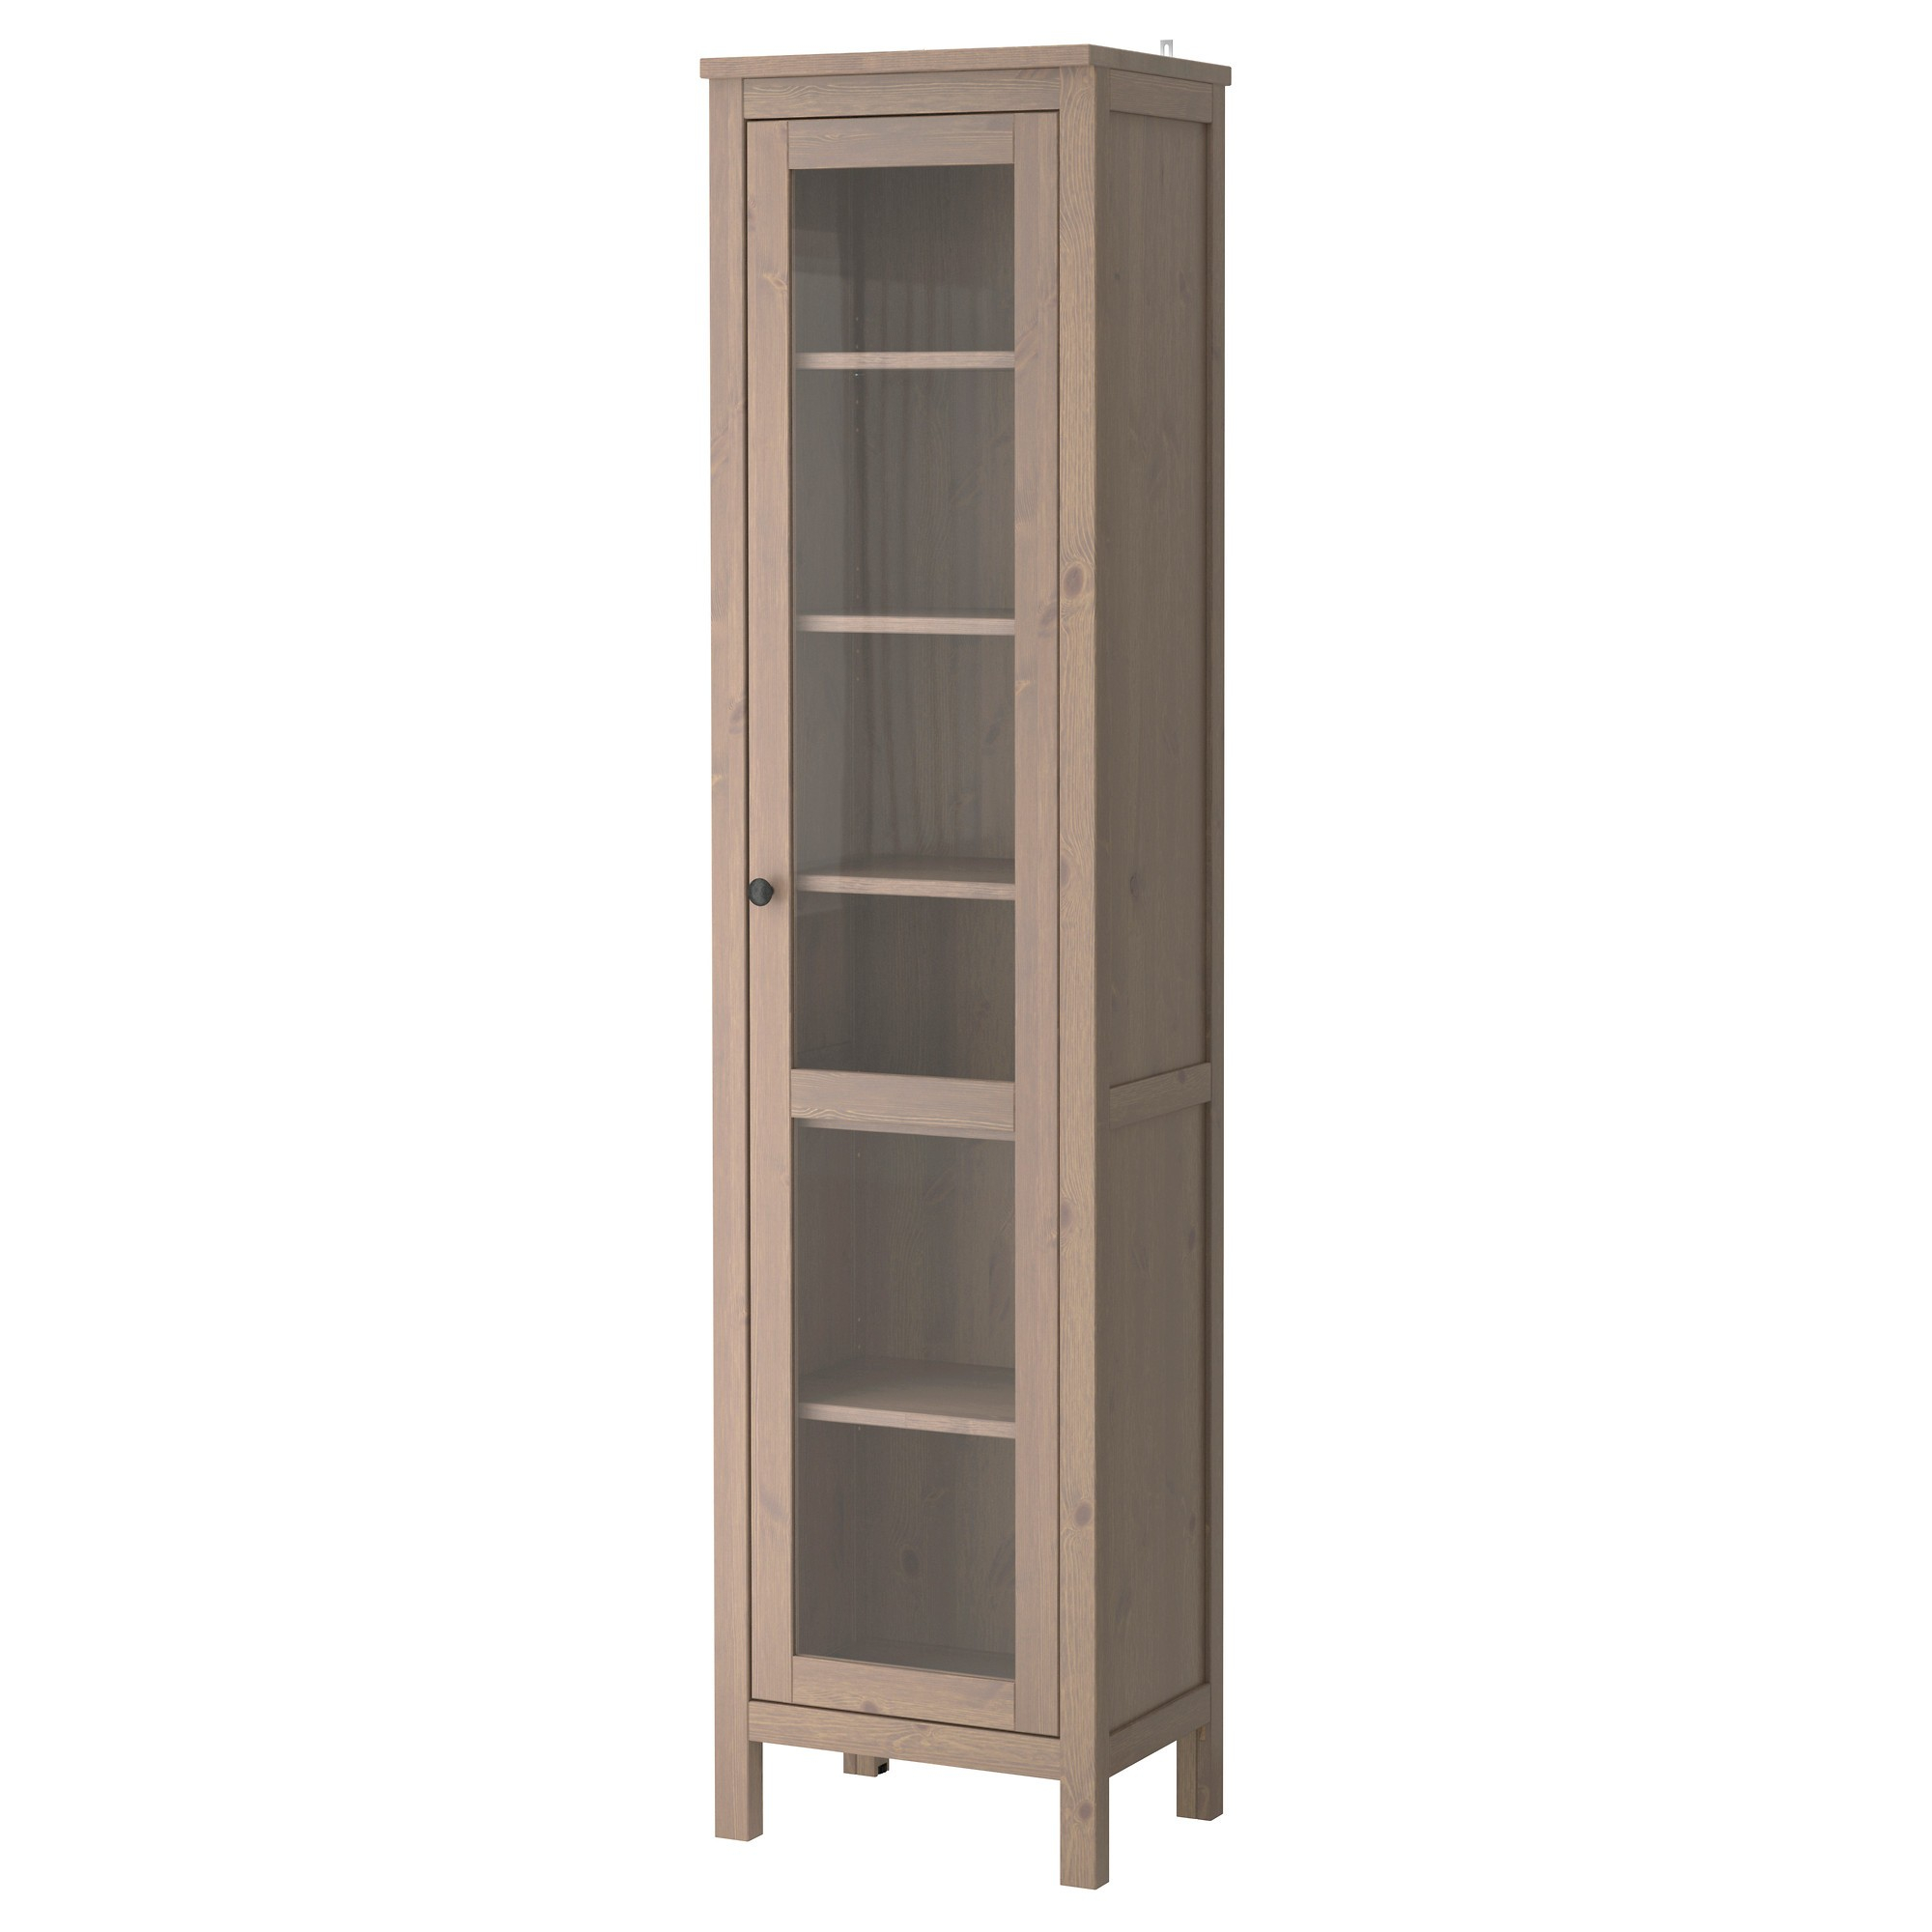 New Small Cabinet With Glass Door Floor Elegant Wood 19 Narrow pertaining to size 2000 X 2000